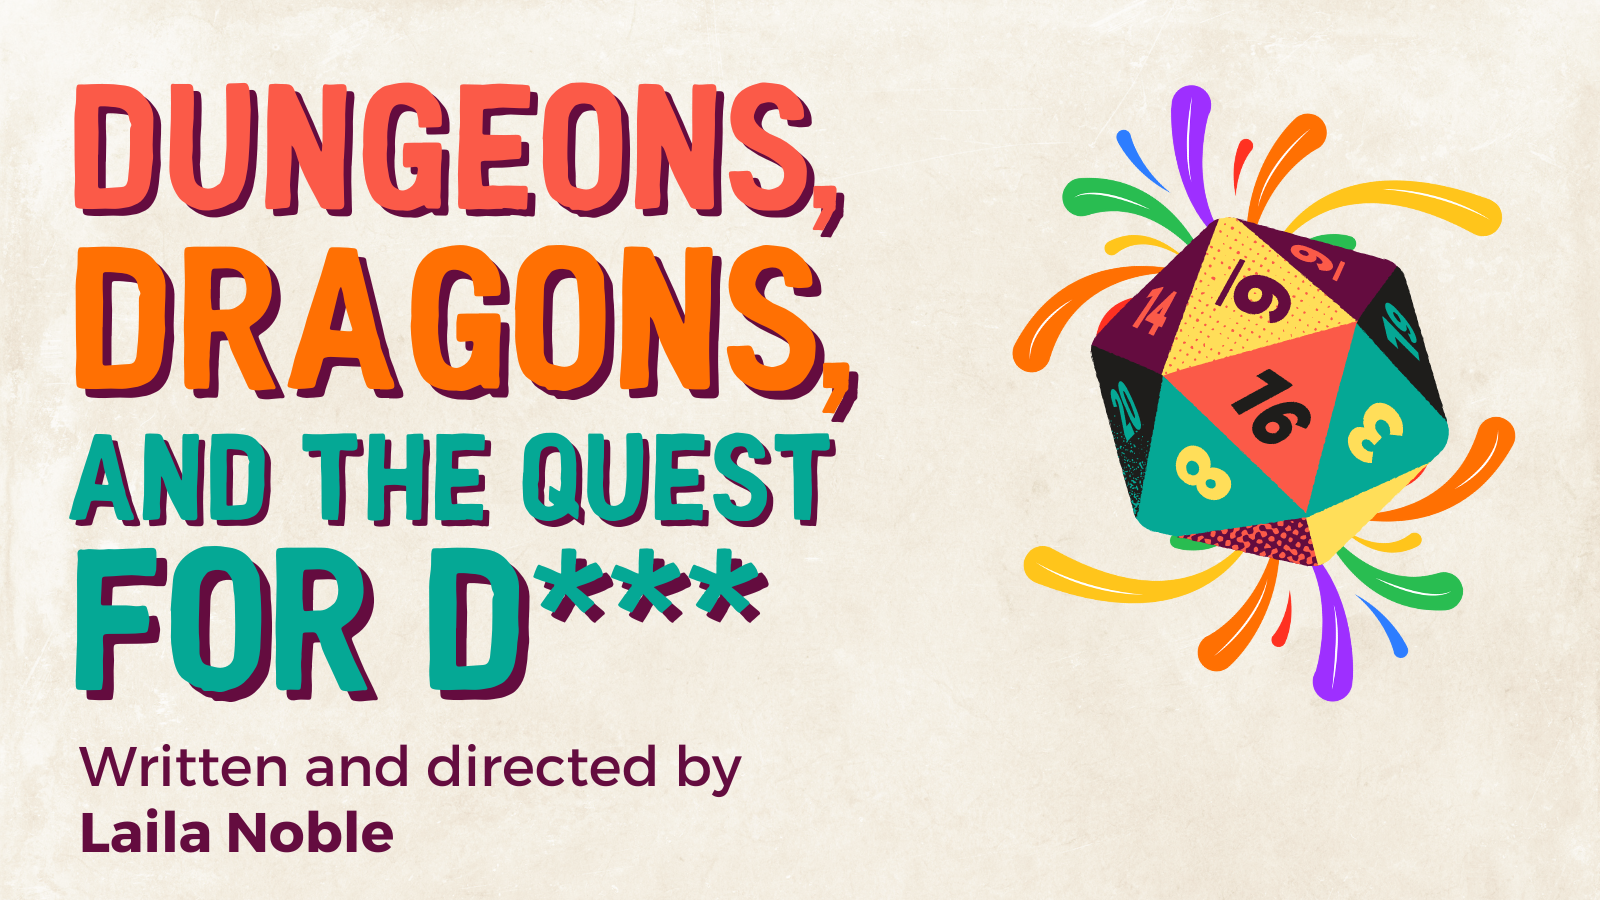 Dungeons, Dragons, and the Quest for D***